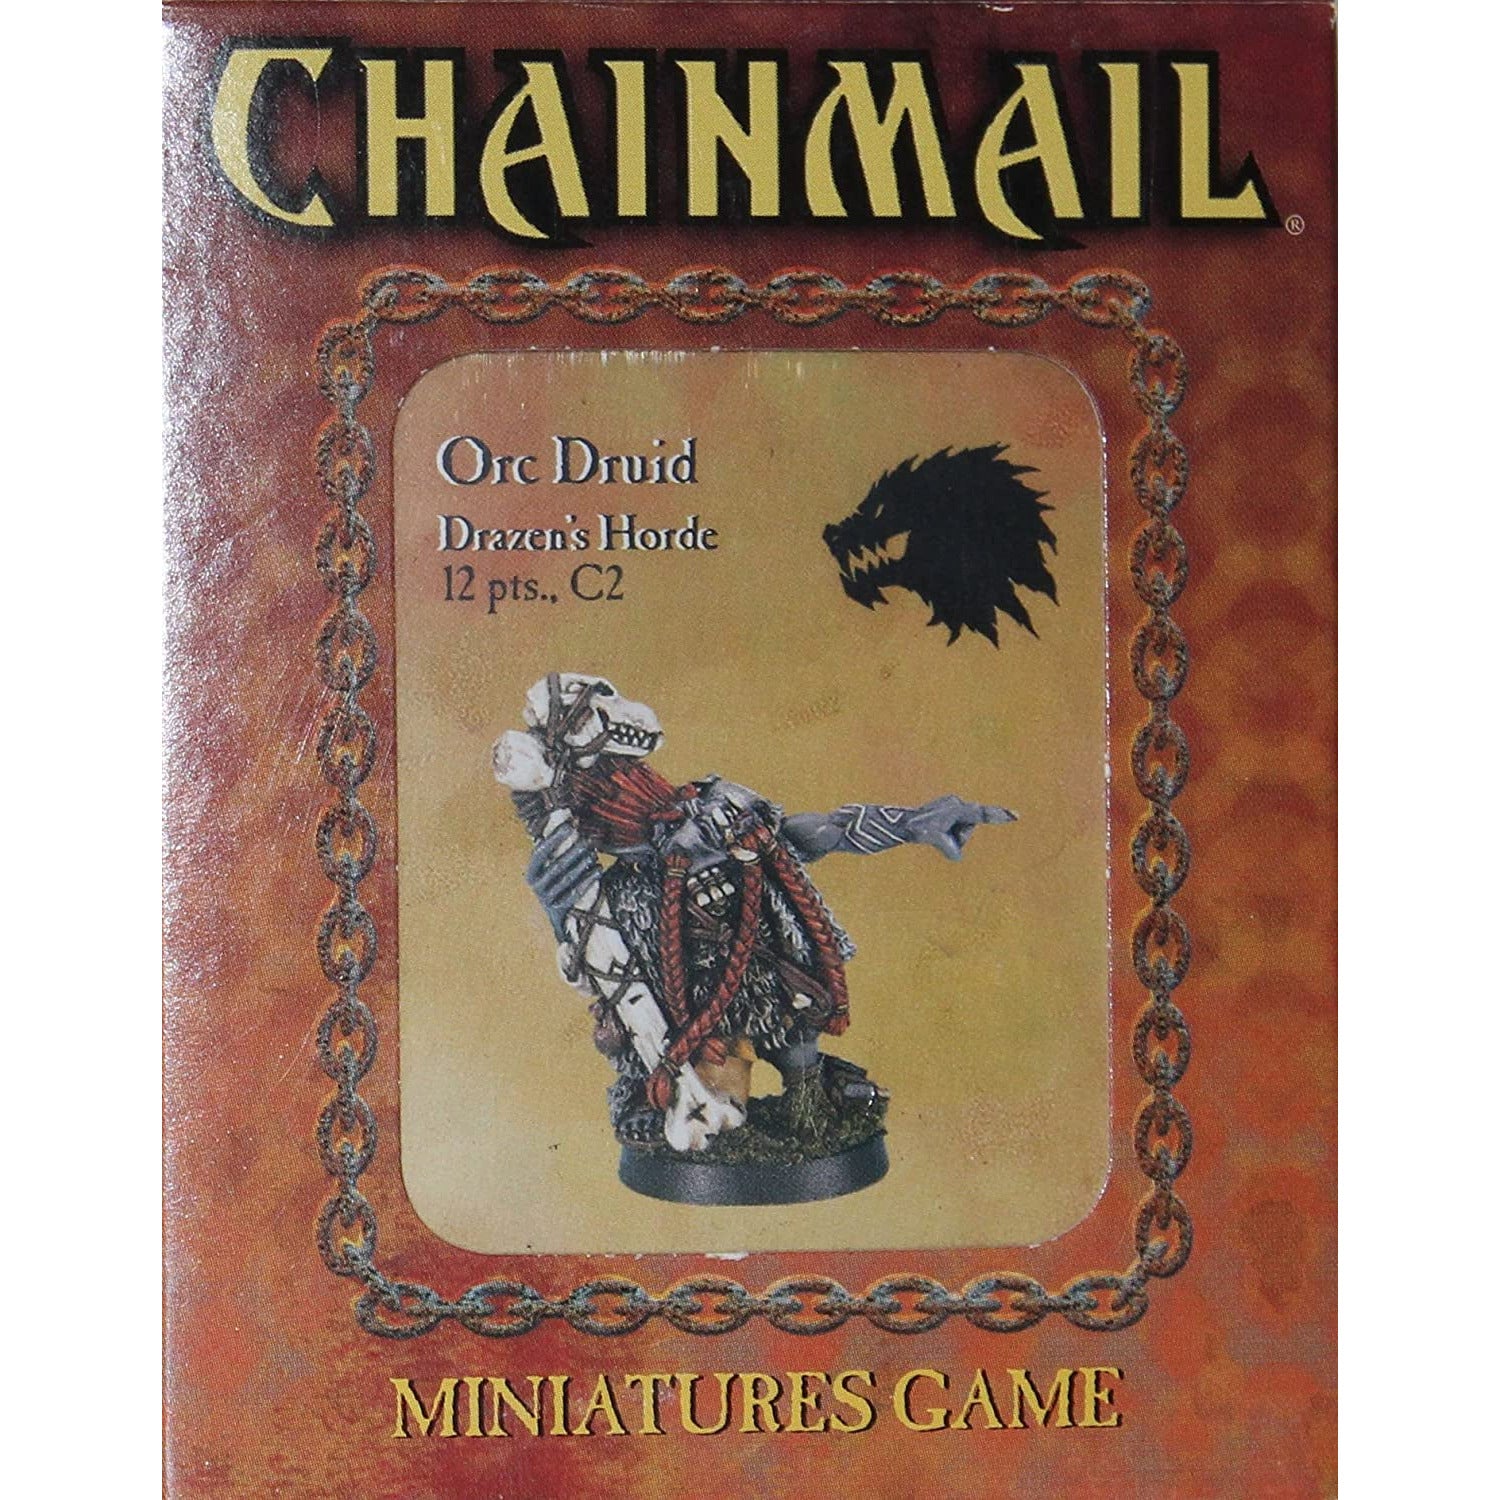 Chainmail Classic Miniatures - Orc Druid